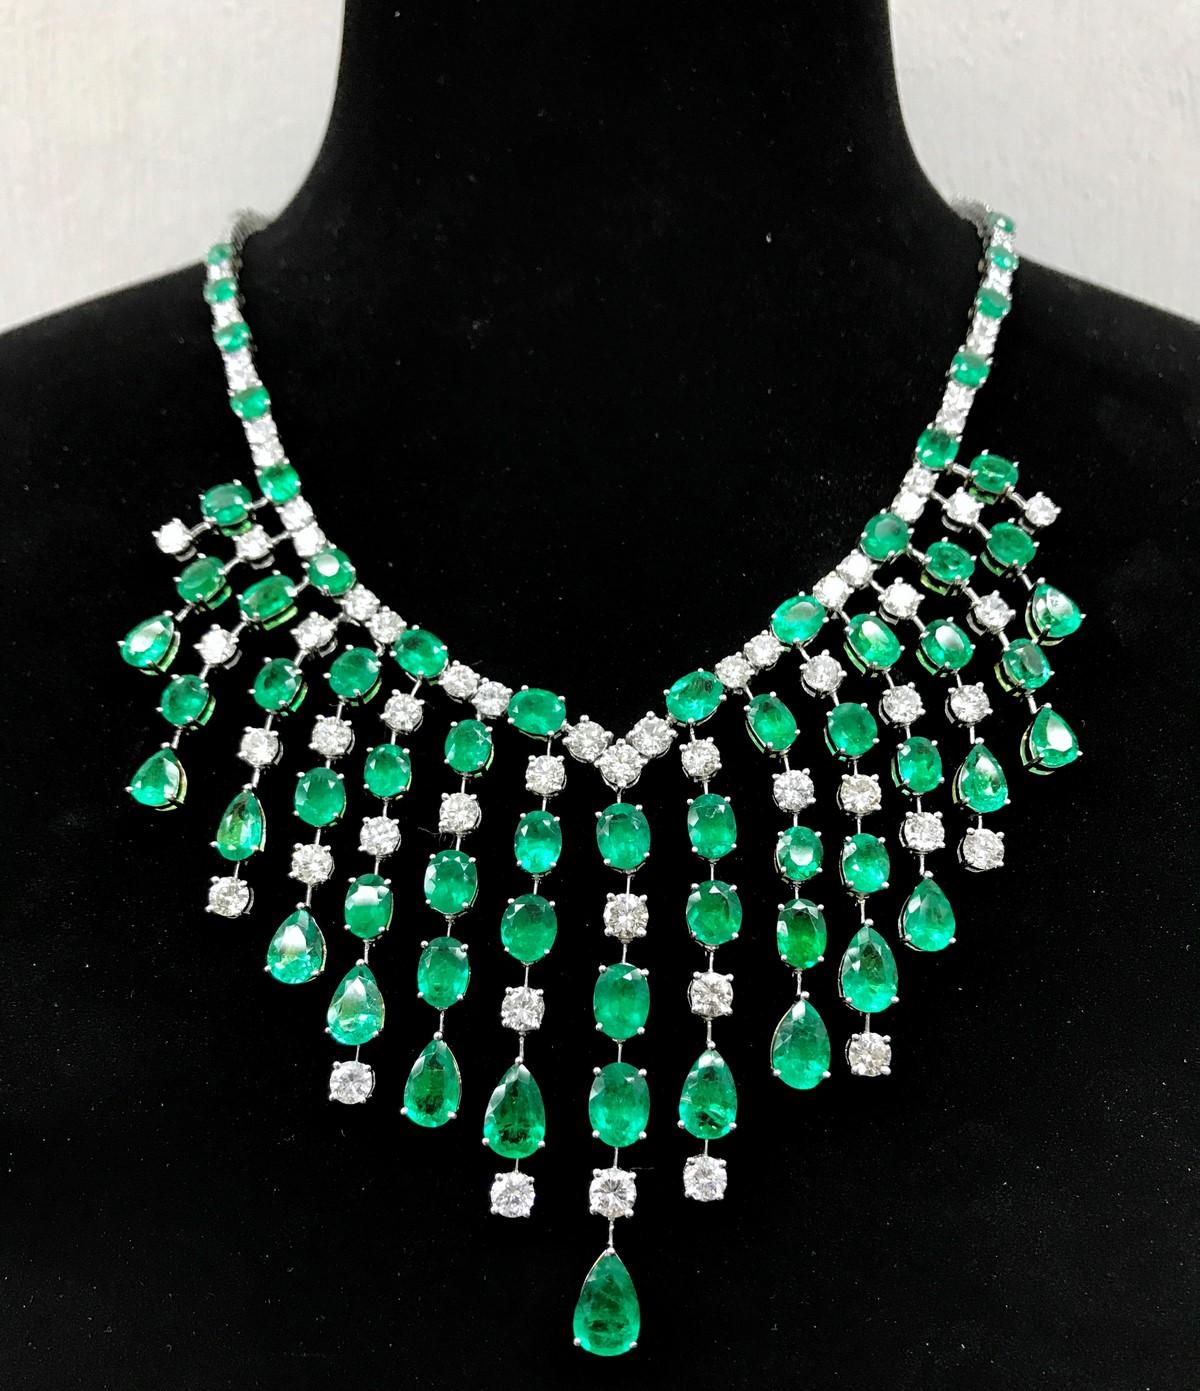 The Following Items we are offering is a Rare Important Radiant 18KT White Gold Fancy Winston Style Glistening Diamond and Emerald Necklace consisting of Magnificent Emeralds and Diamonds. Each Fringe contains Spectacular Emeralds and Diamonds.